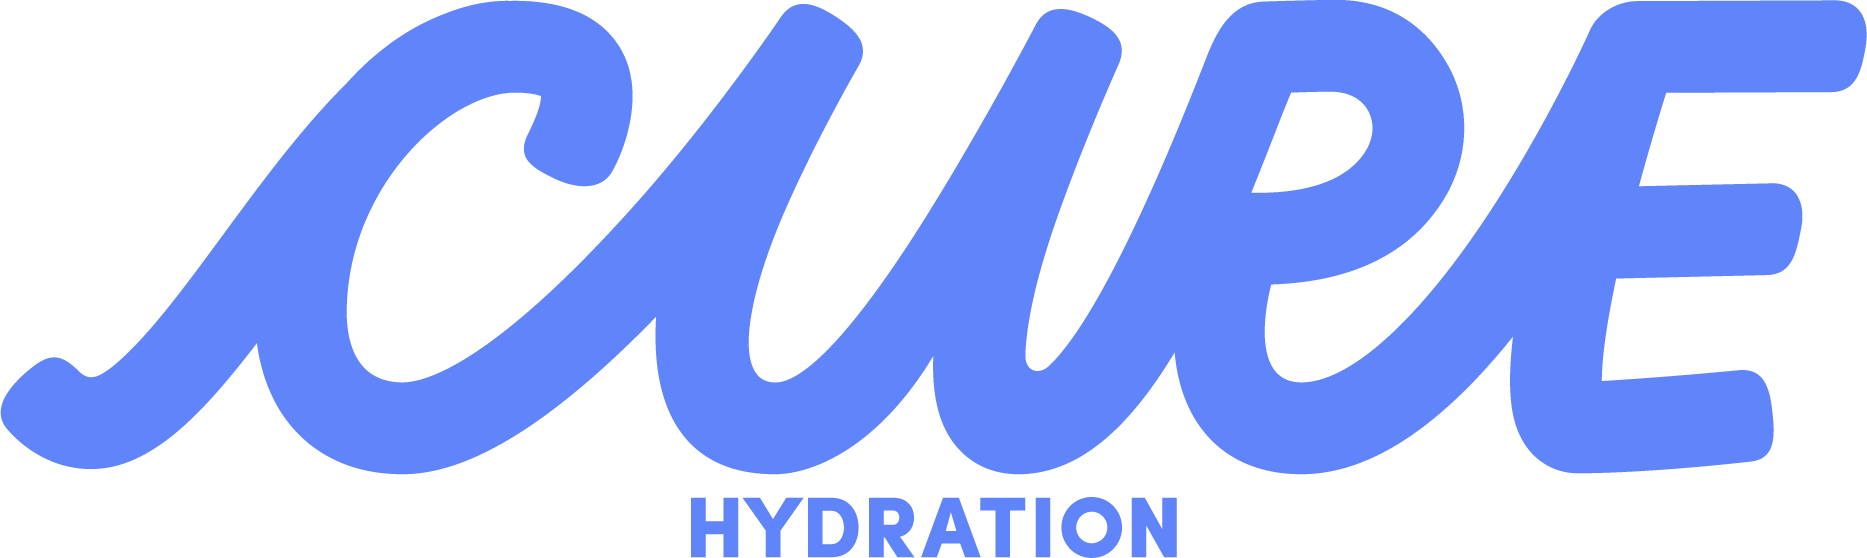 Cure Hydration.png